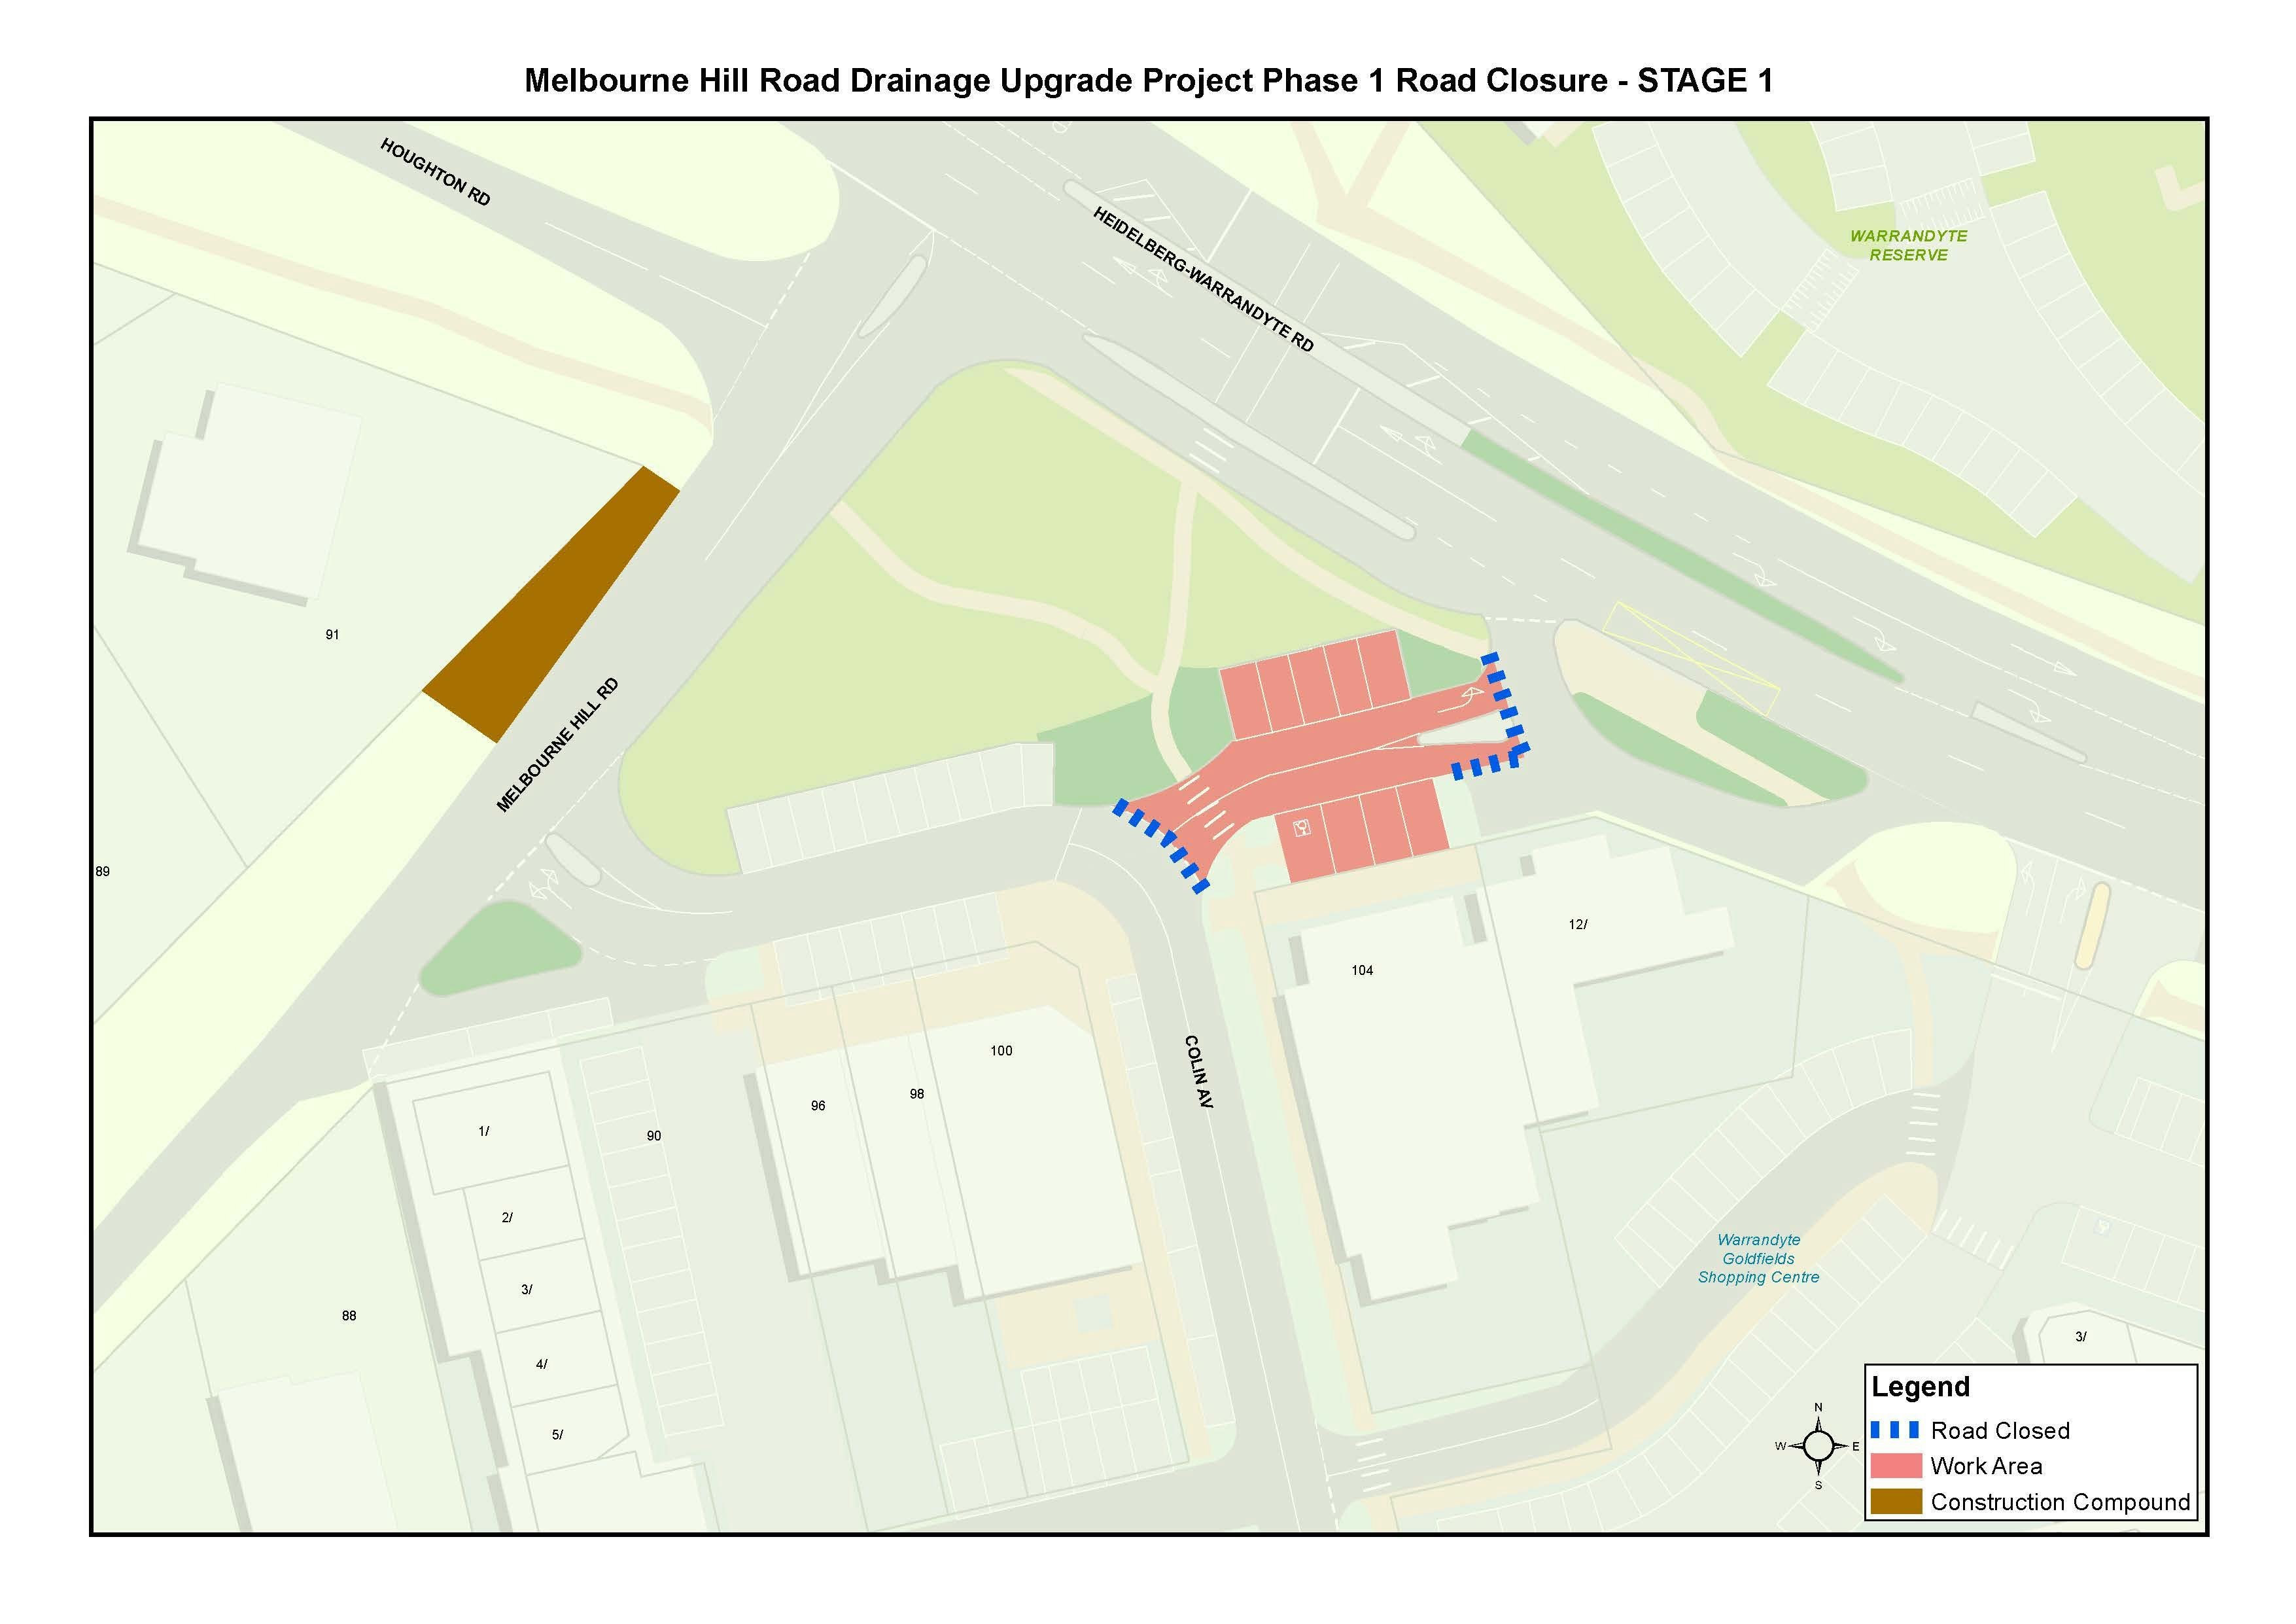 Road Closure Map - Phase one, stage one - COMPLETE